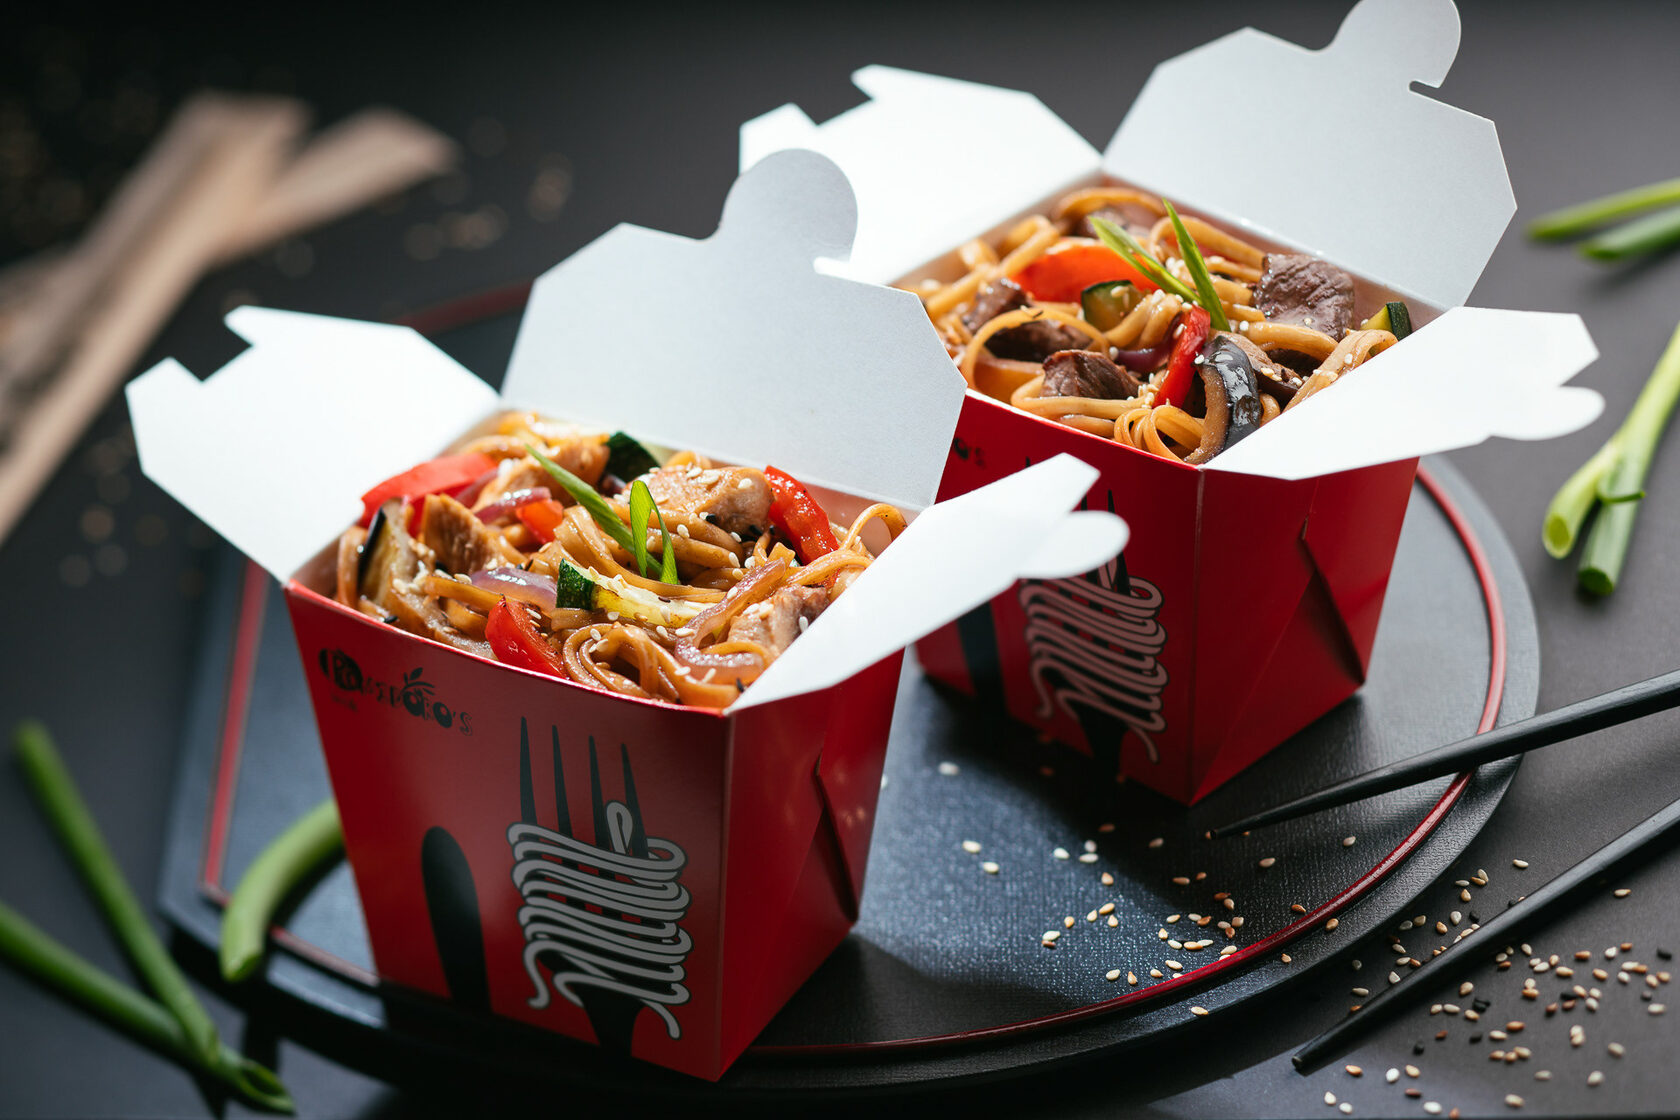 How to Customize a Noodle Box